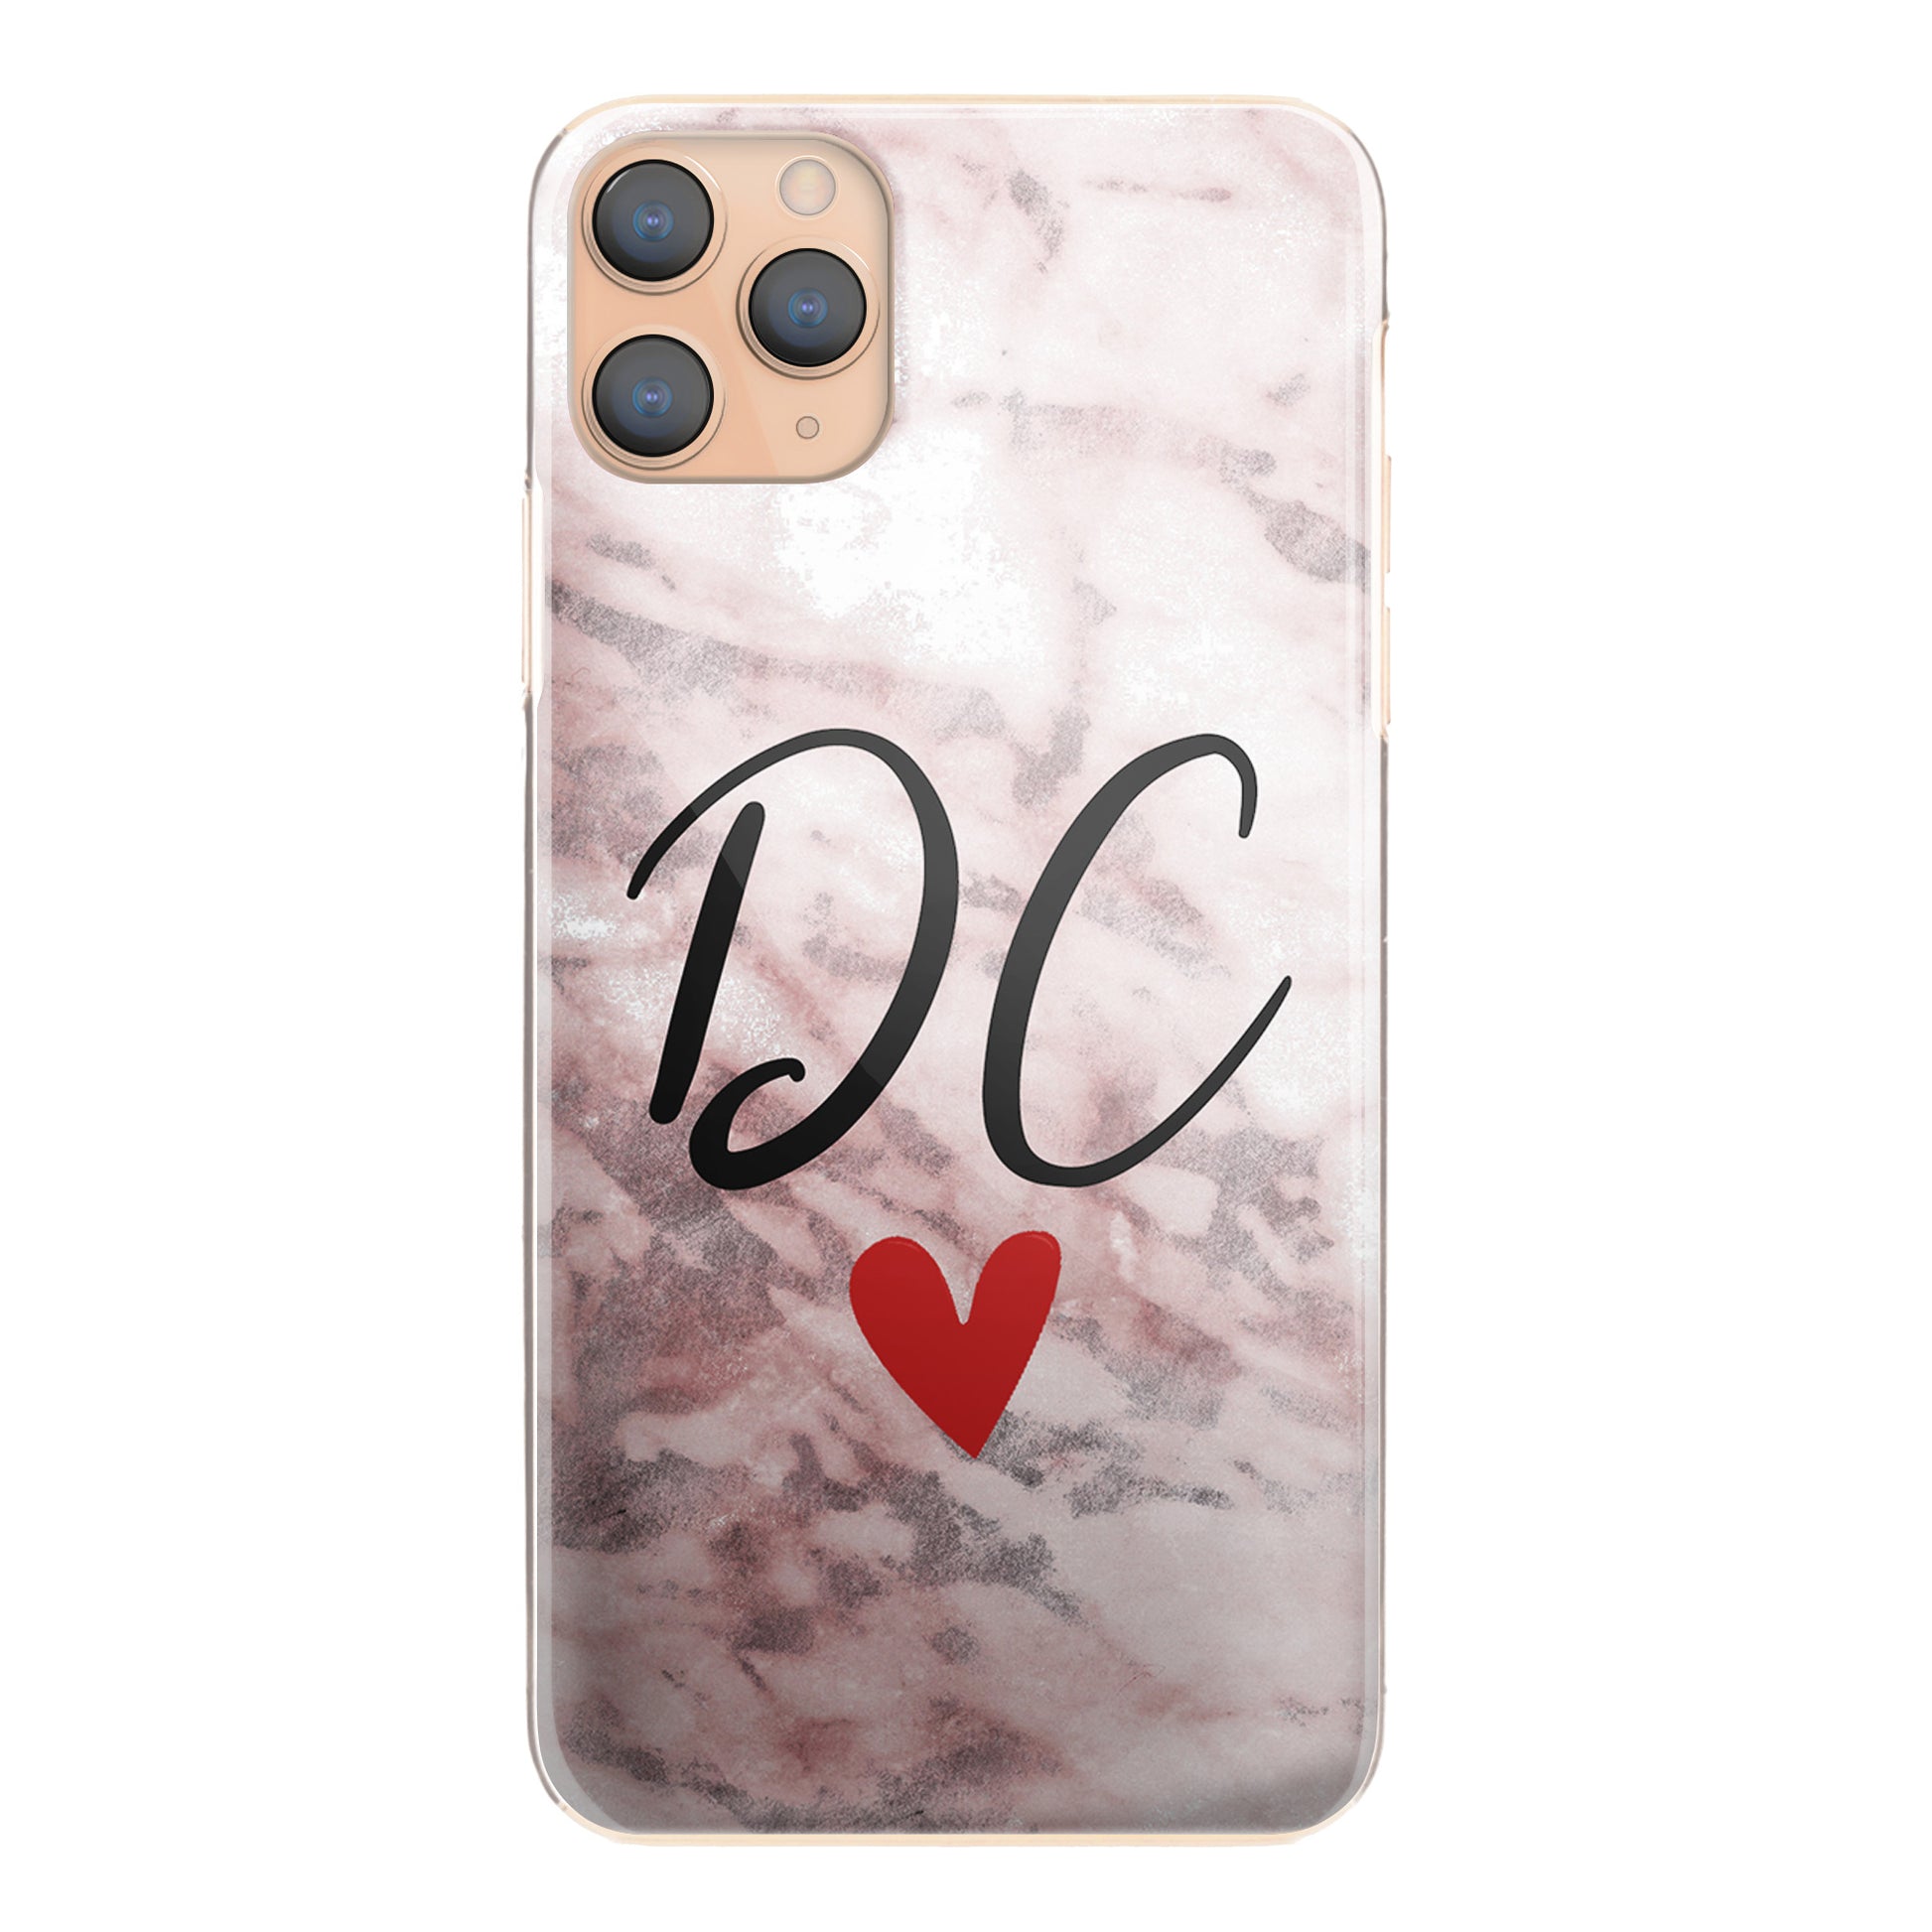 Personalised Xiaomi Phone Hard Case with Heart Accented Stylish Initials on Pink Marble